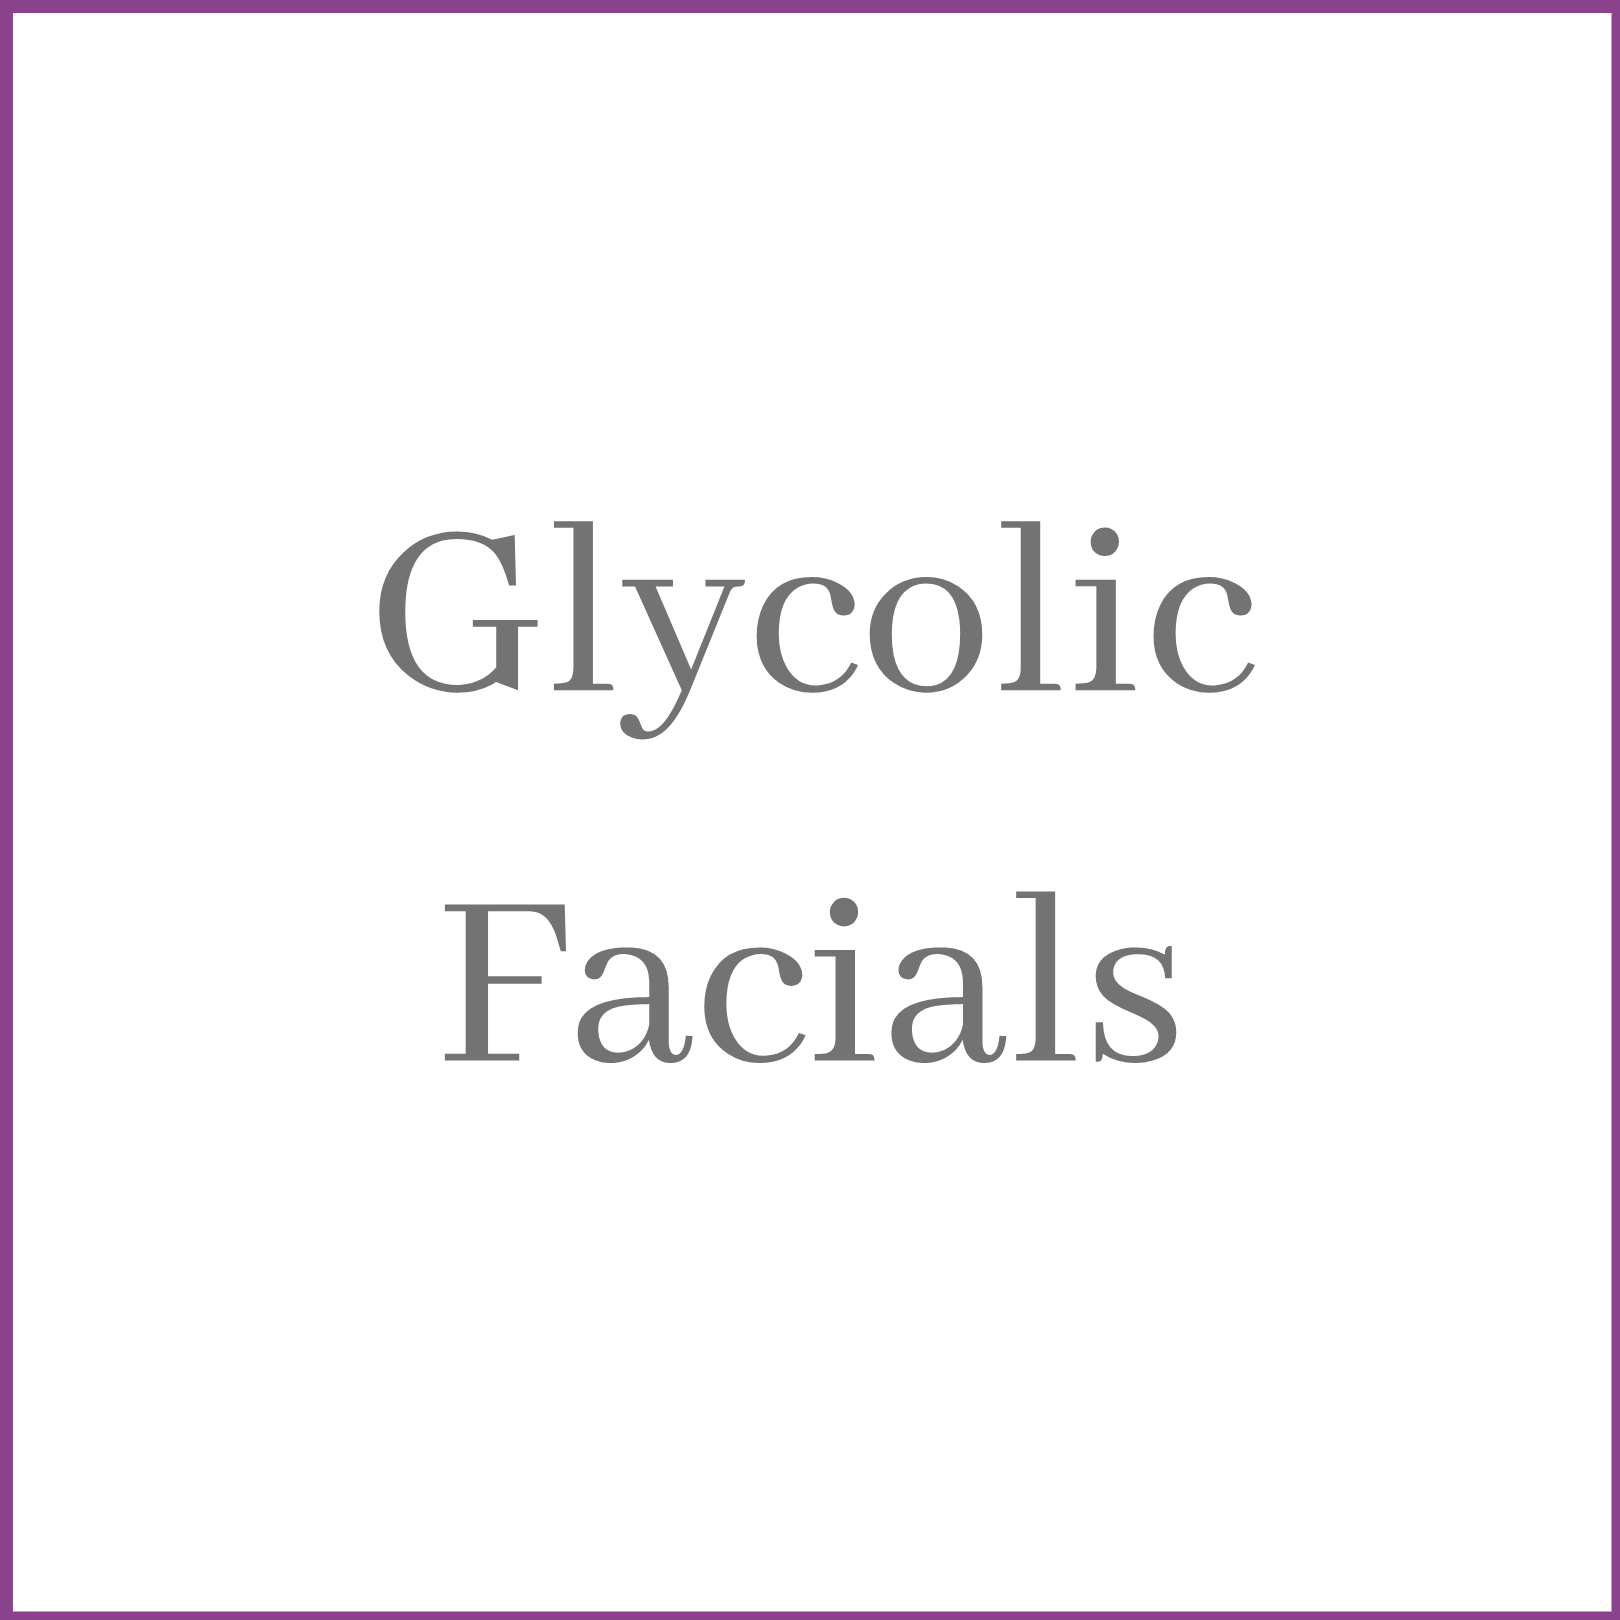 Glycolic Peel Facial Aftercare Advice